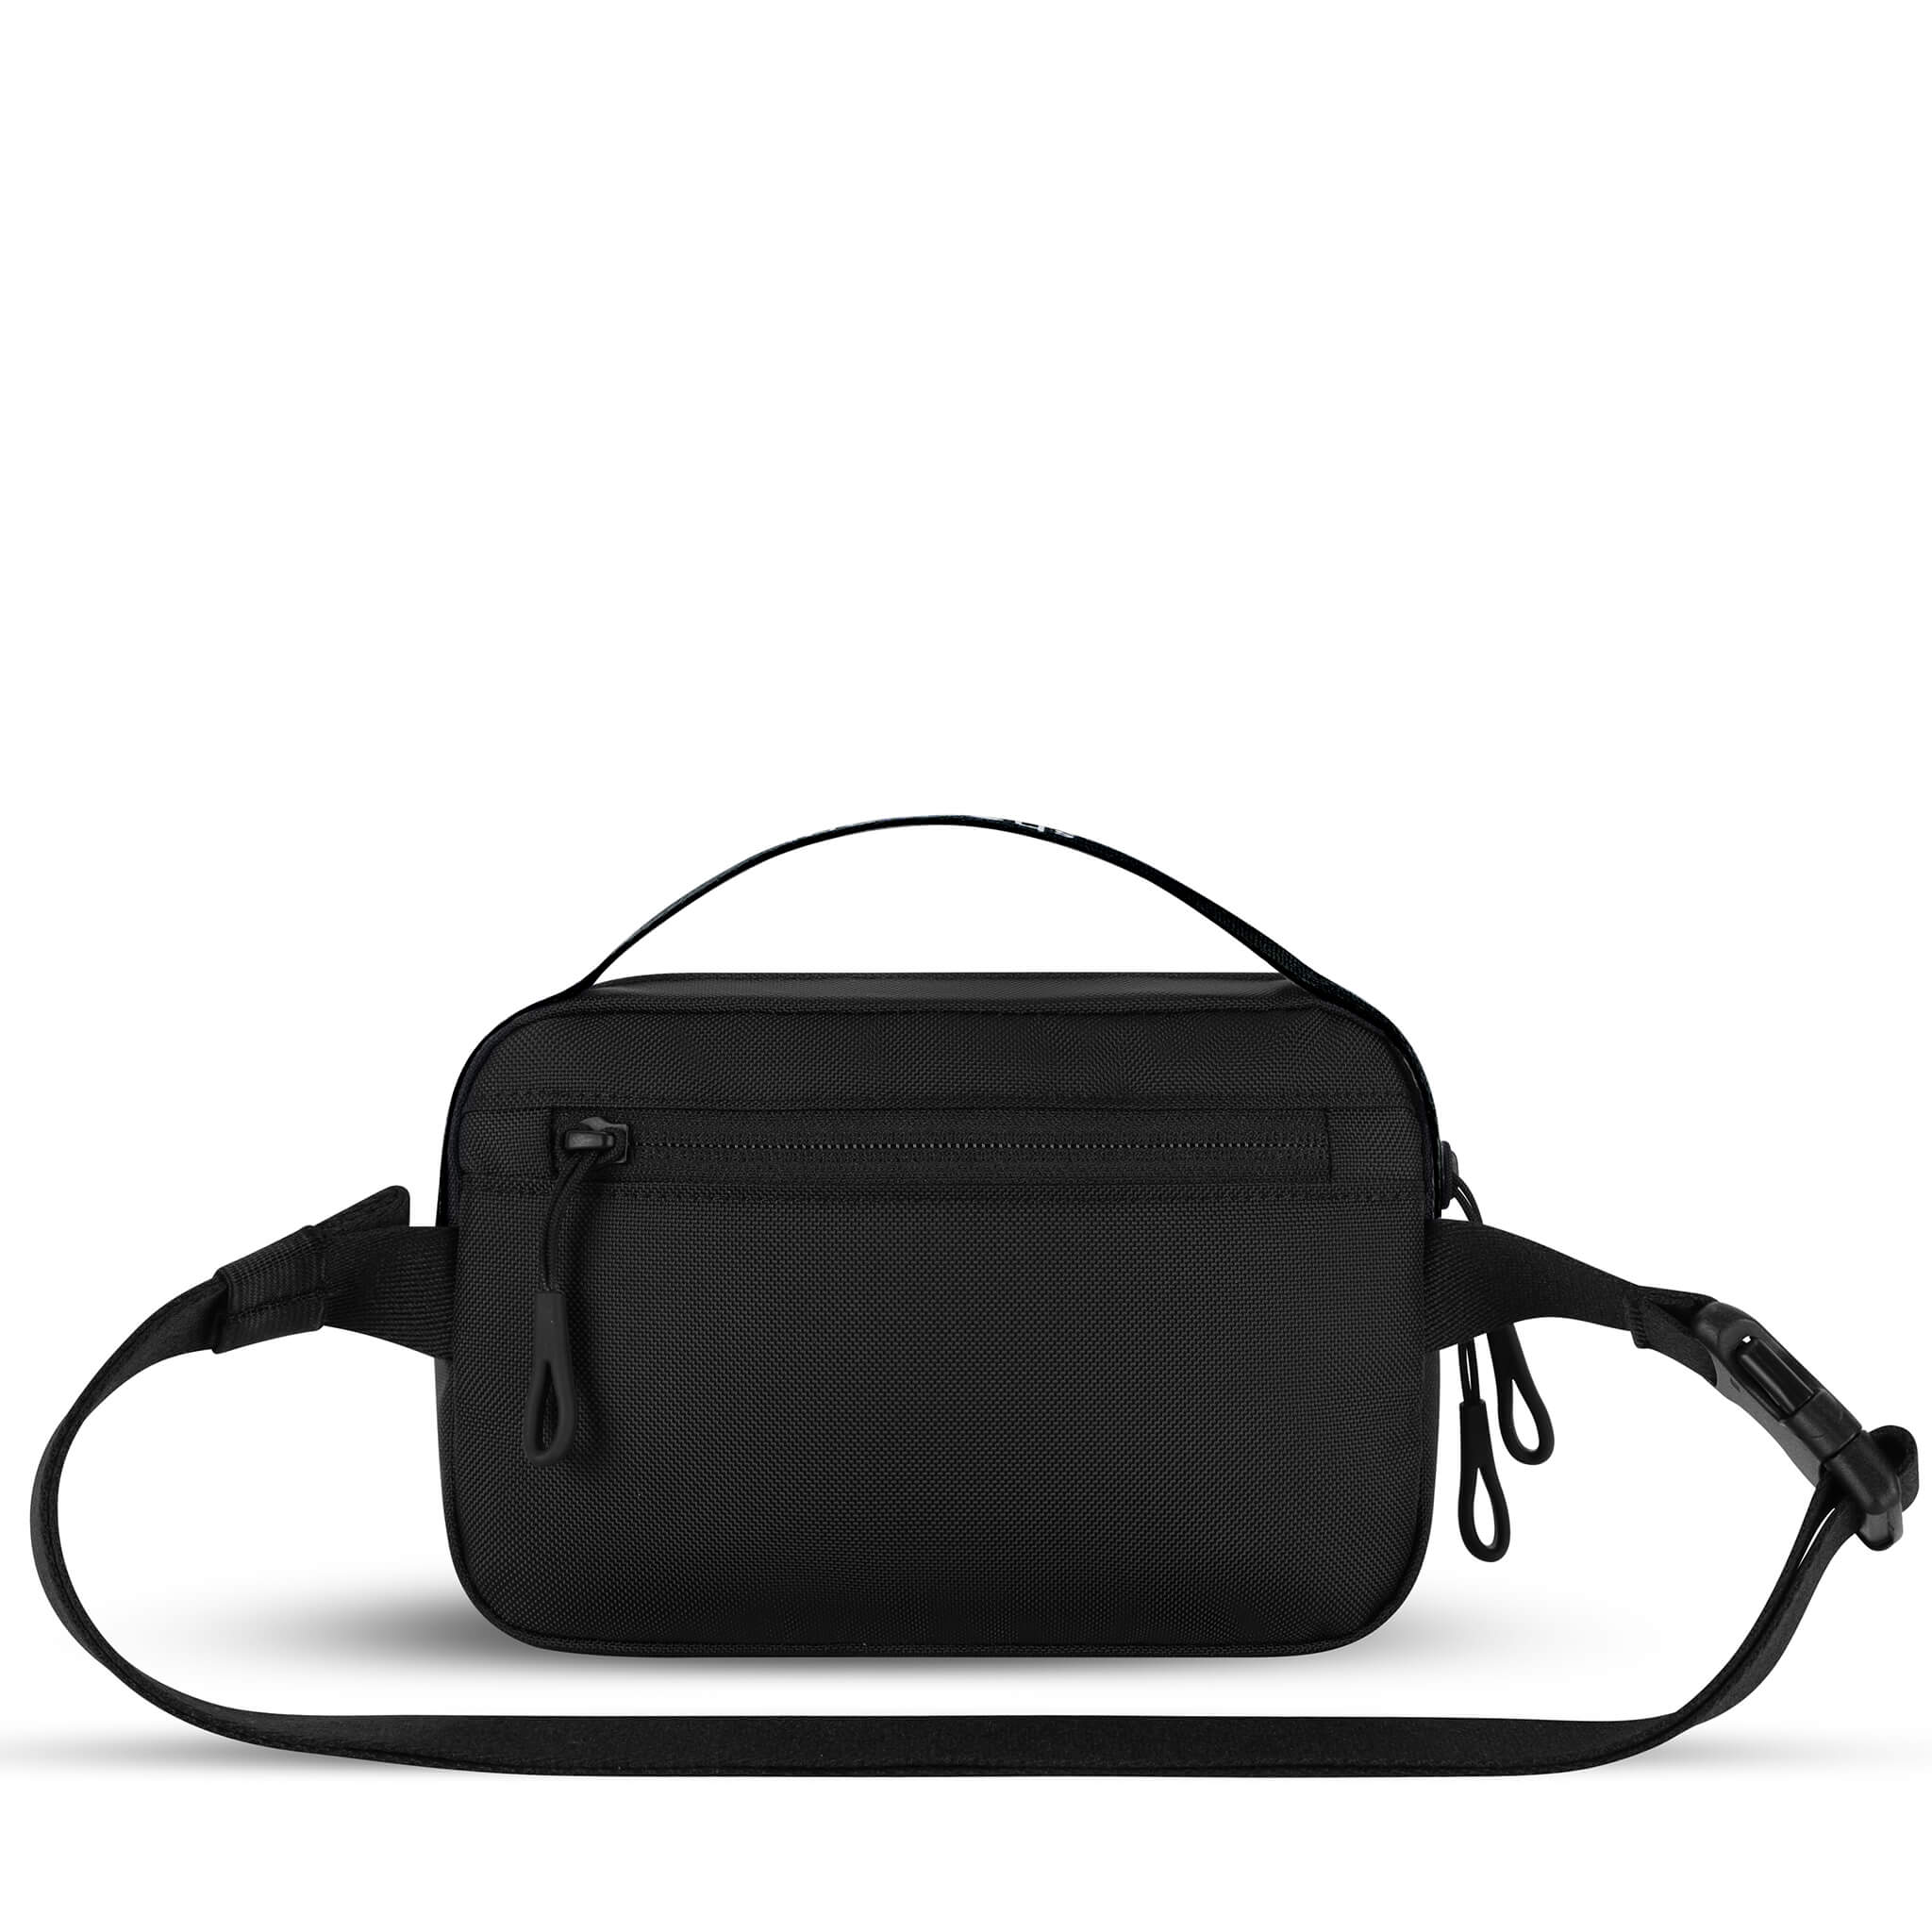 Back view of Sherpani&#39;s fanny pack, the Hyk in Raven. The back of the bag is black. Easy-pull zippers are accented in black. The fanny pack features an adjustable strap with a buckle.